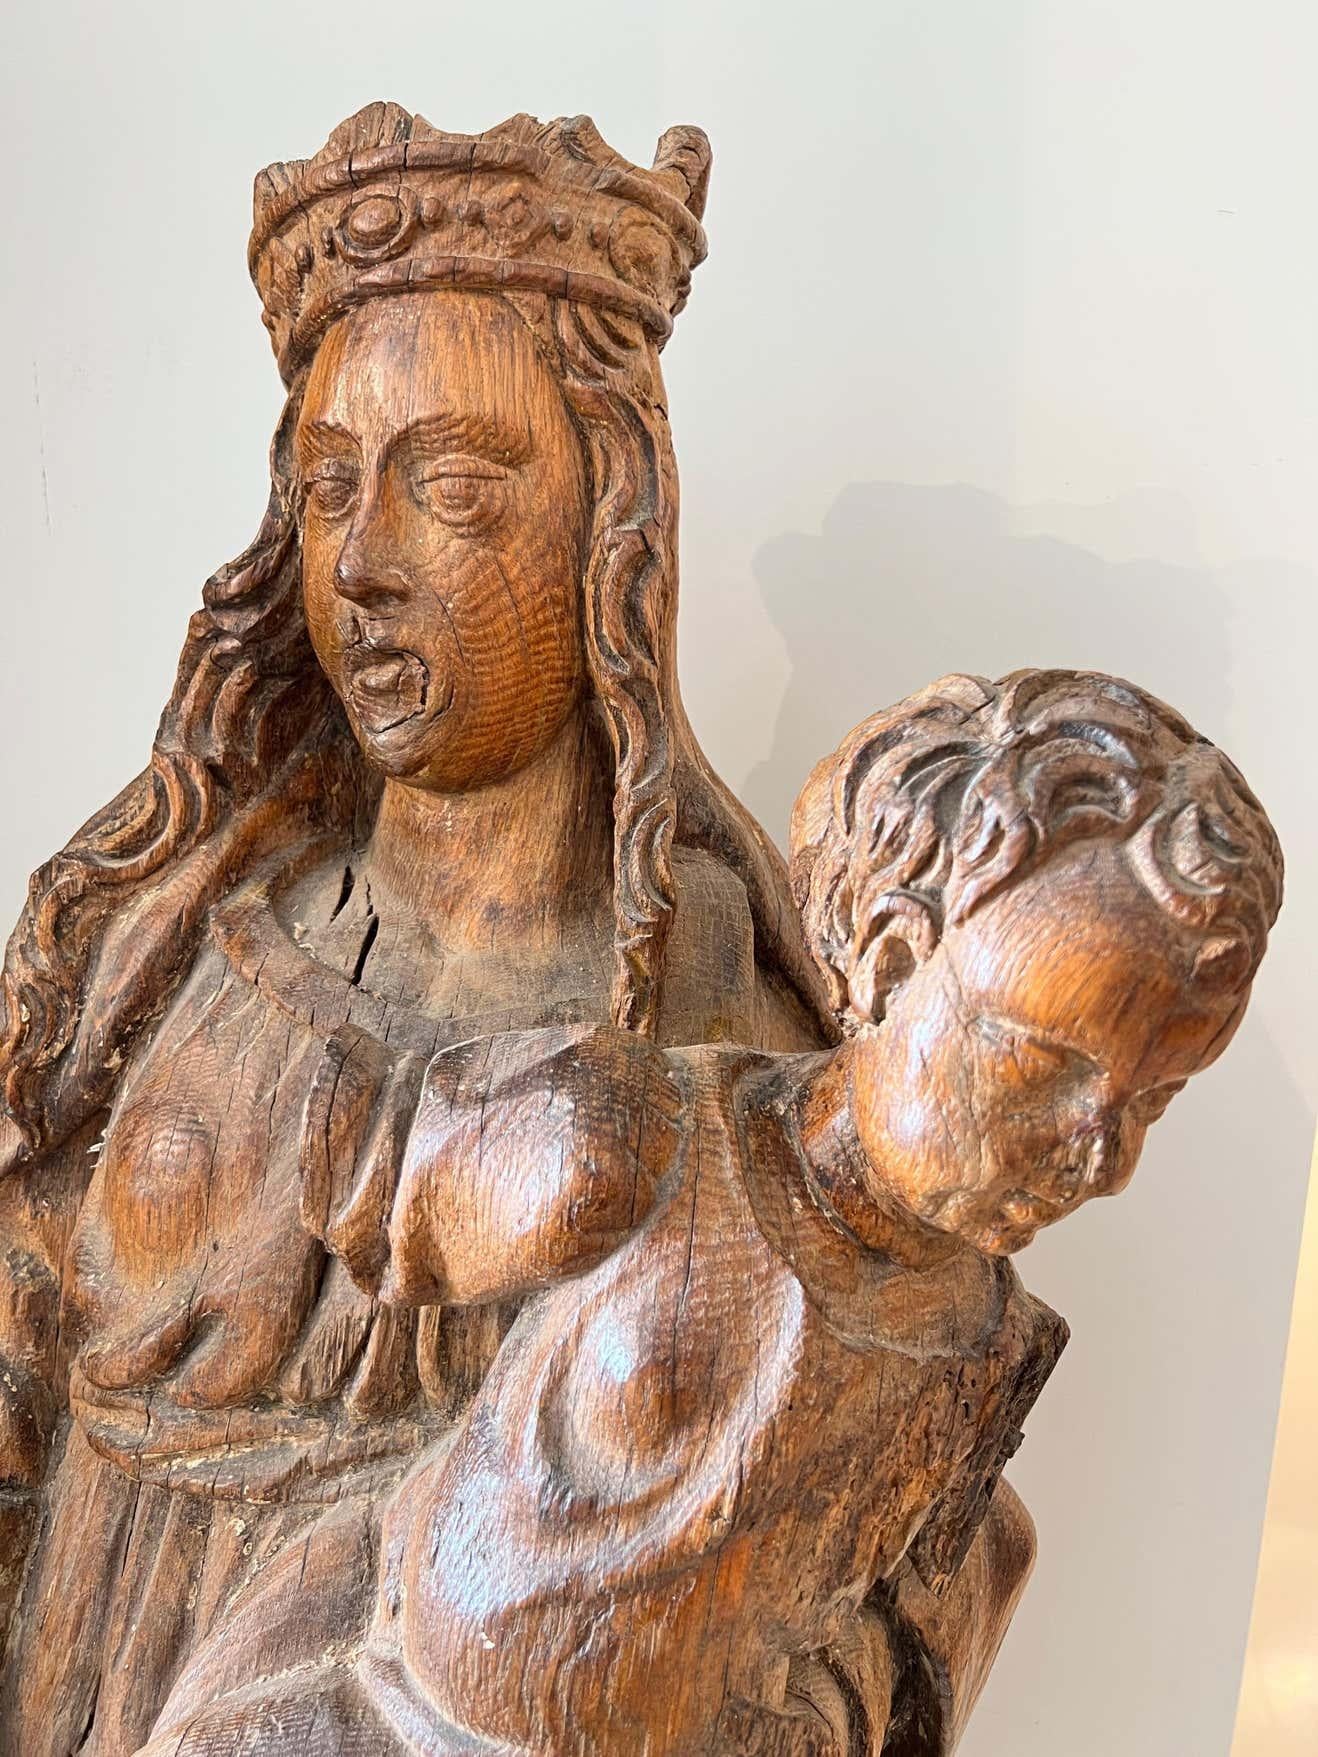 how much is the madonna and child sculpture worth